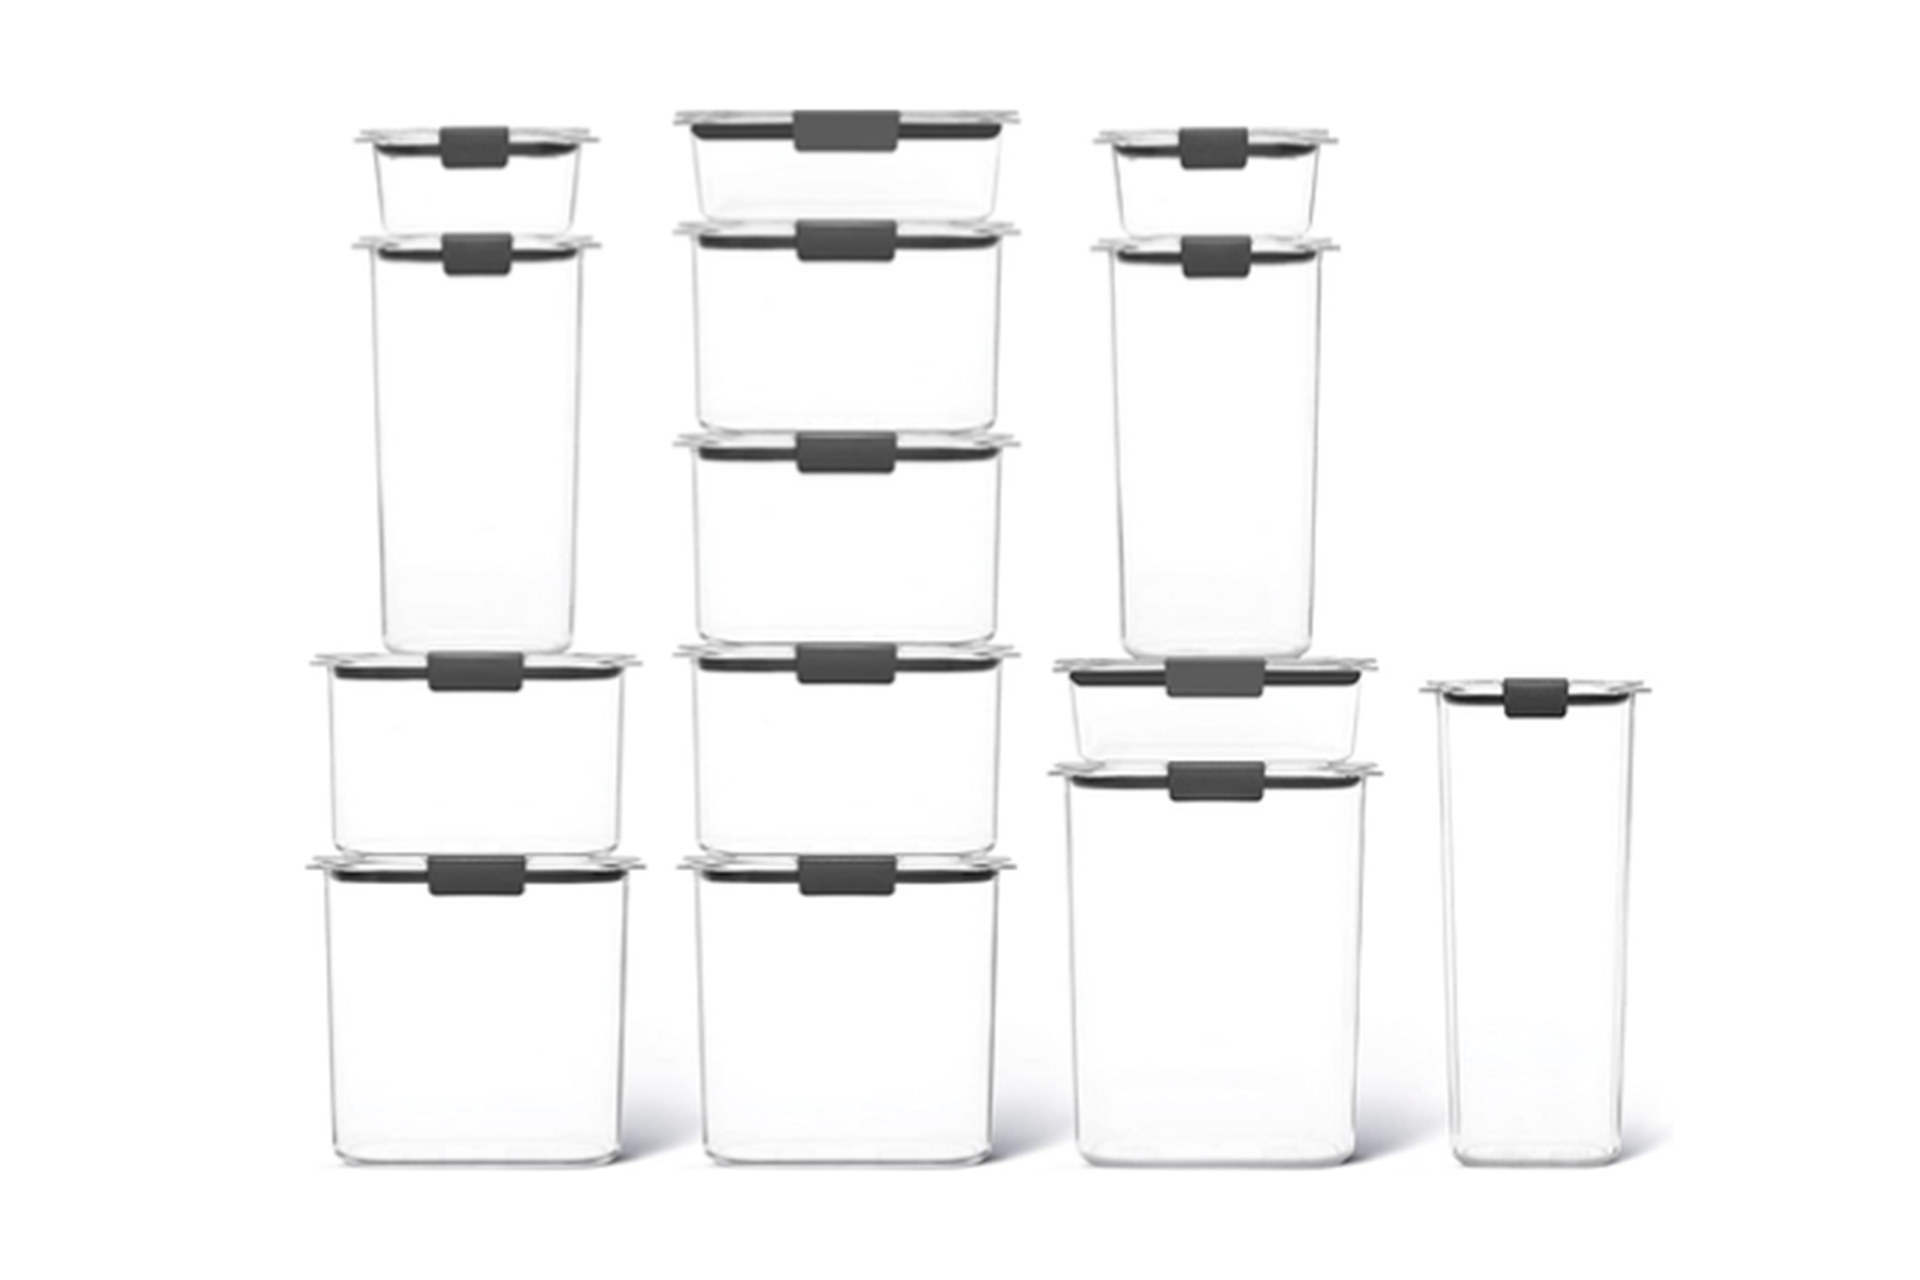 72 Rubbermaid Brilliance ideas  rubbermaid, food storage containers, food  storage